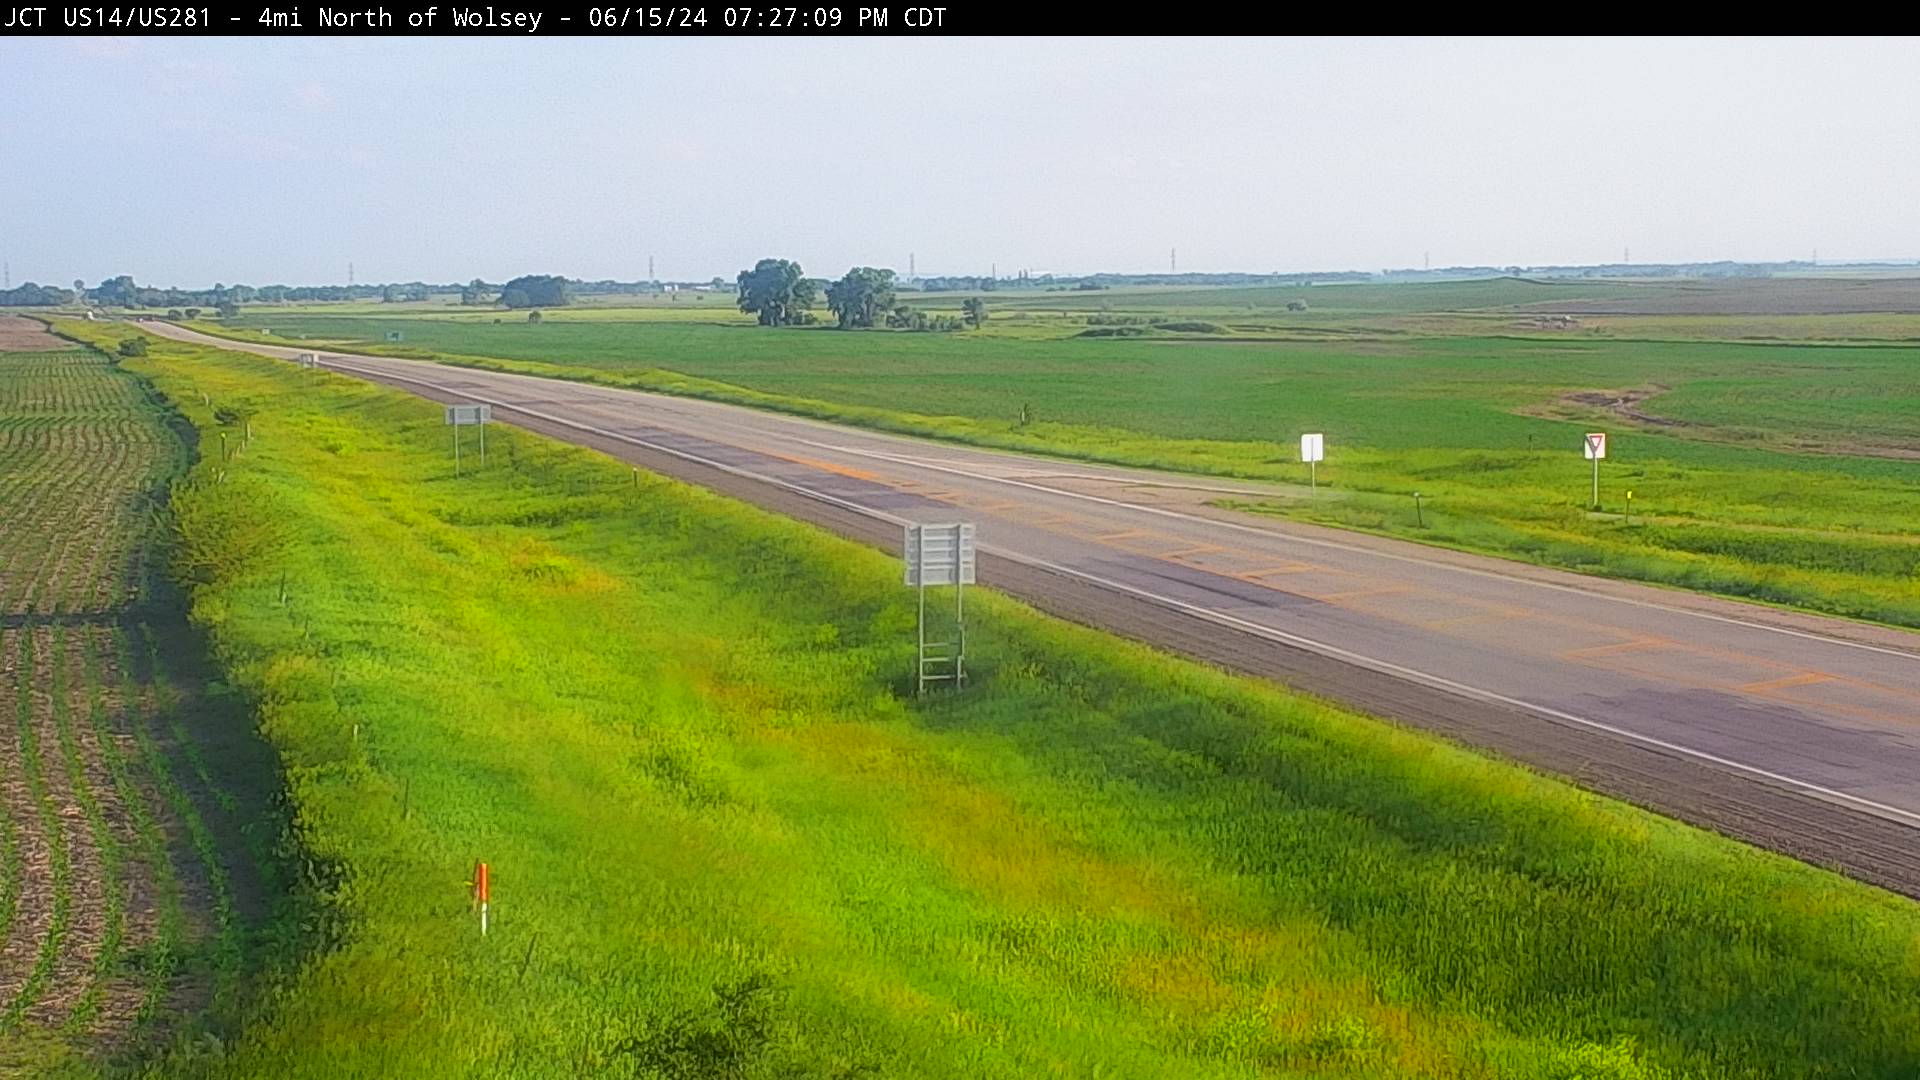 4 miles north of town at junction US-14 & US-281 - South Traffic Camera